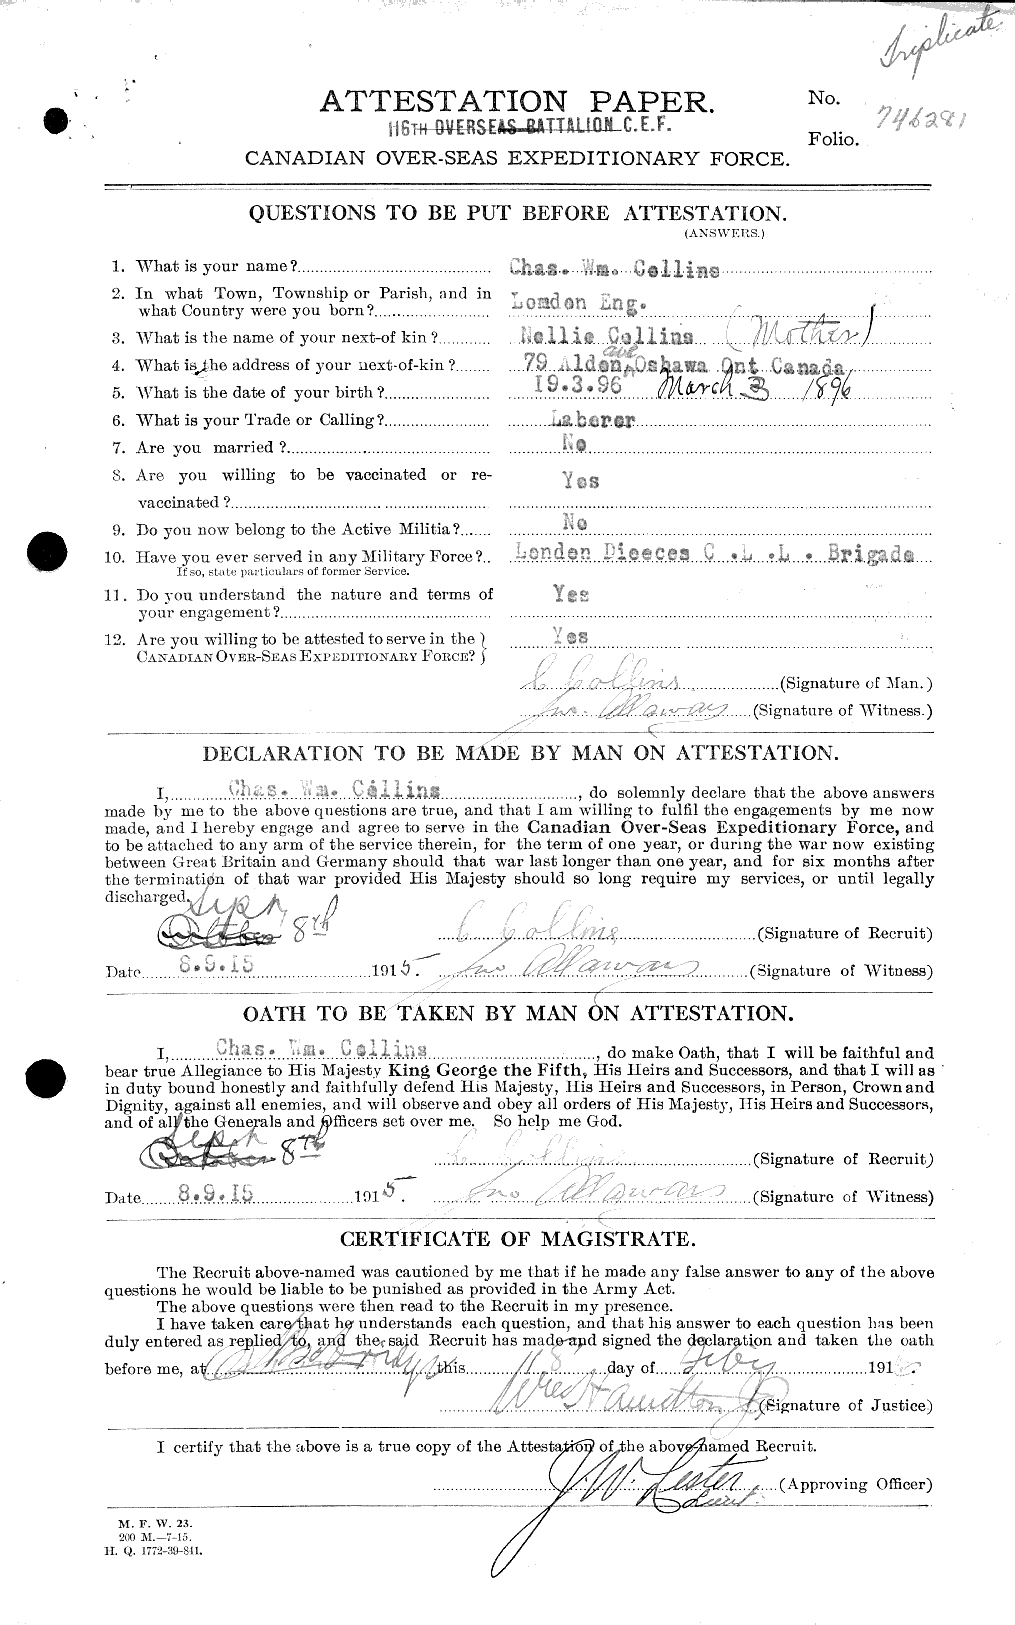 Personnel Records of the First World War - CEF 029045a